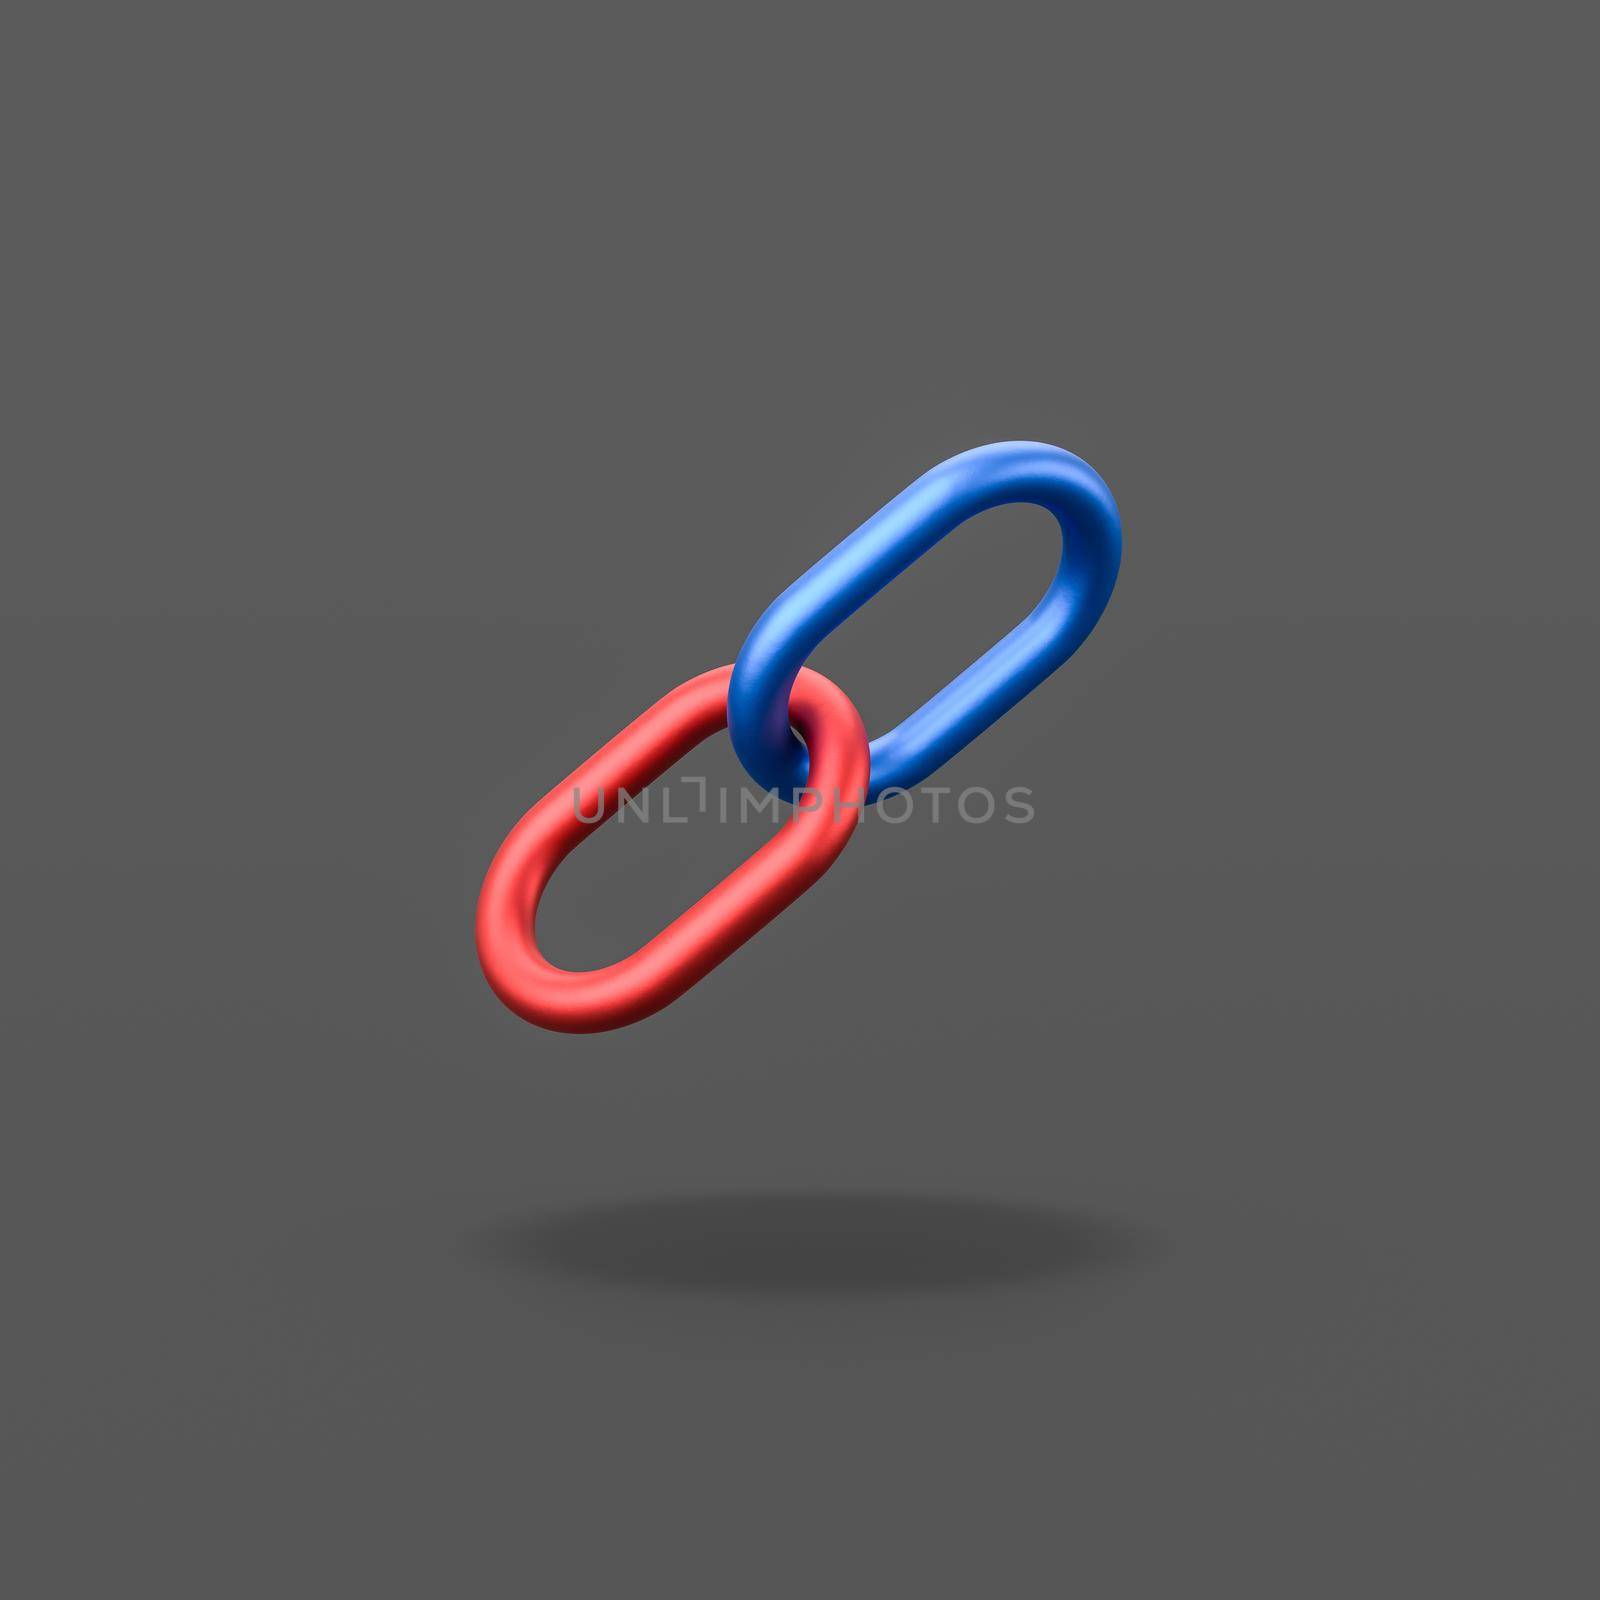 Two Red and Blue Metal Chain Links Joined Together, Isolated on Flat Black Background with Shadow 3D Illustration, Combine Concept